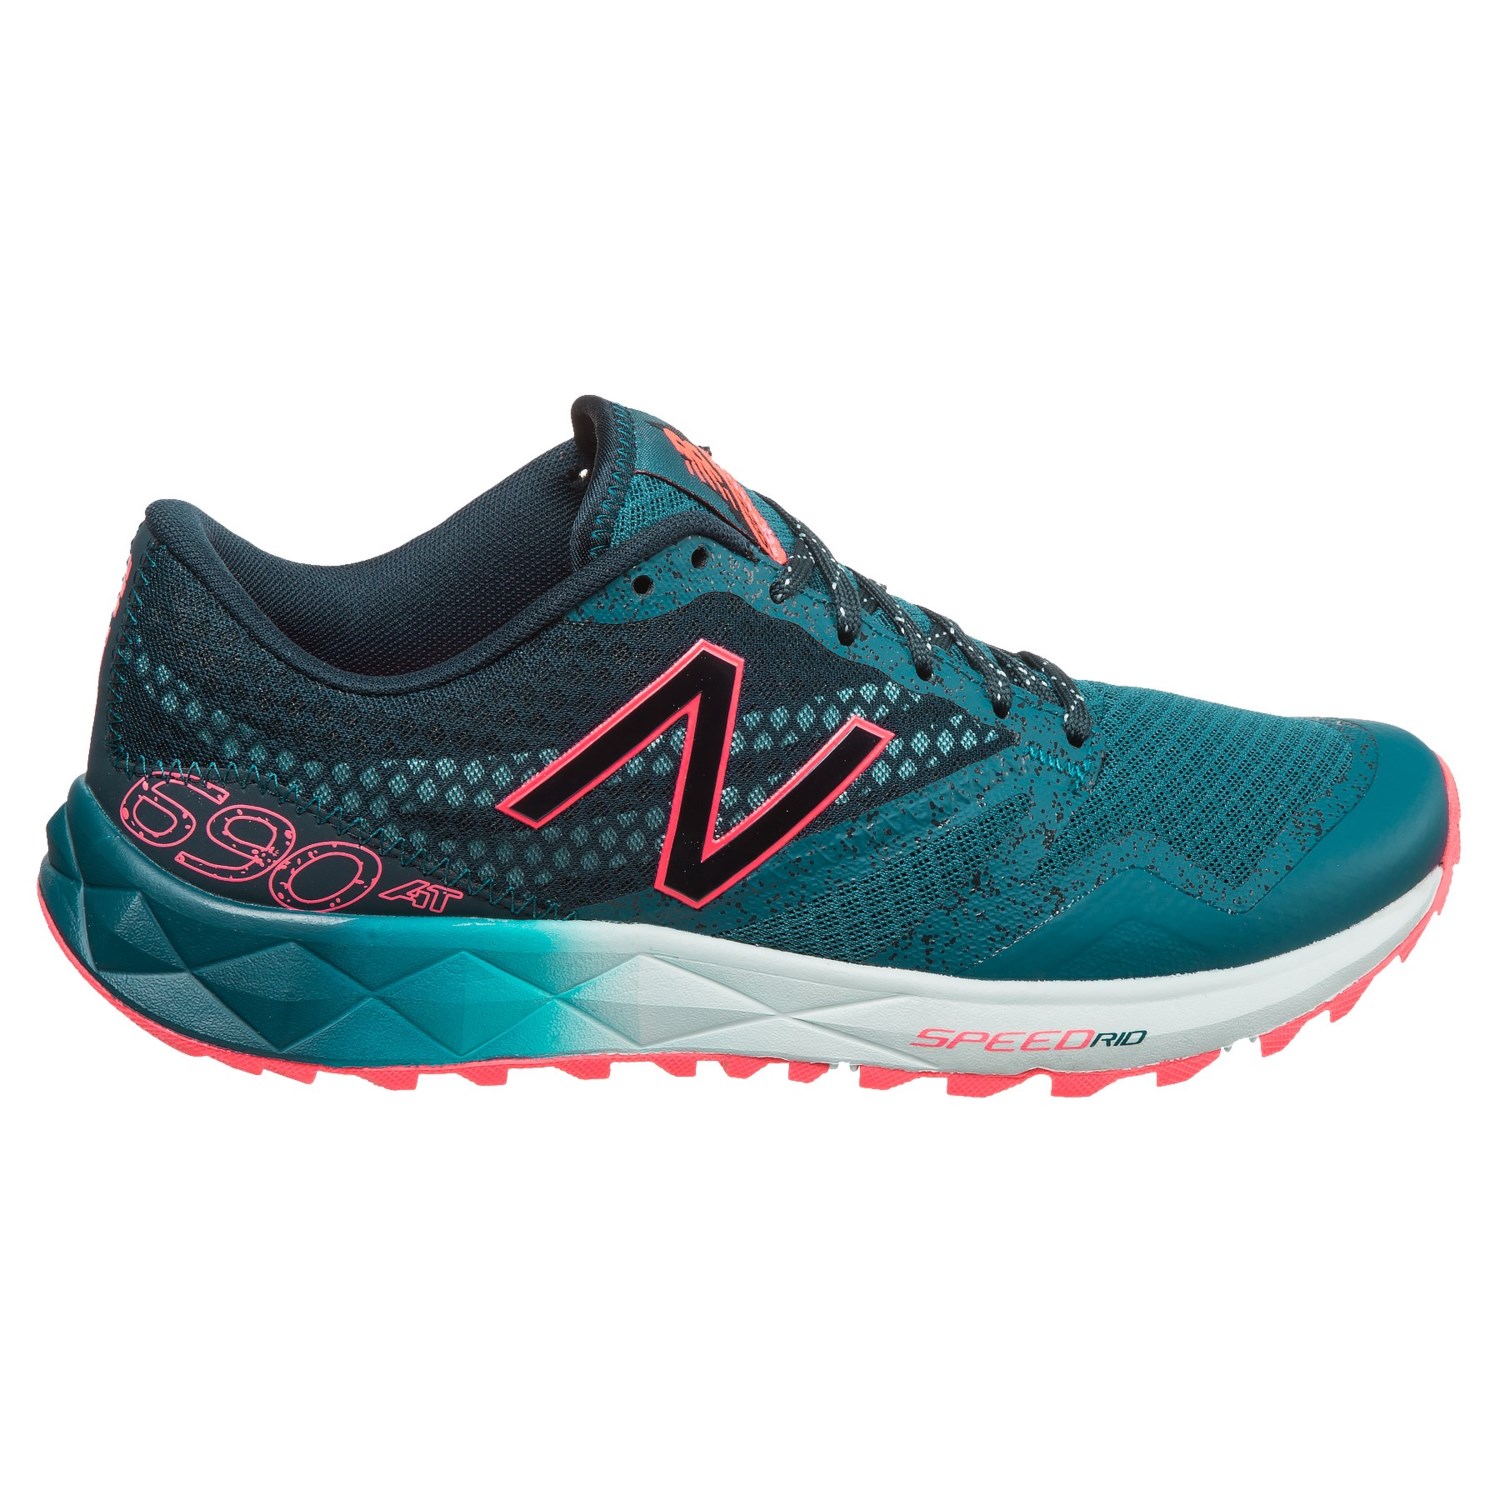 New Balance 690 AT Trail Running Shoes (For Women) - Save 46%